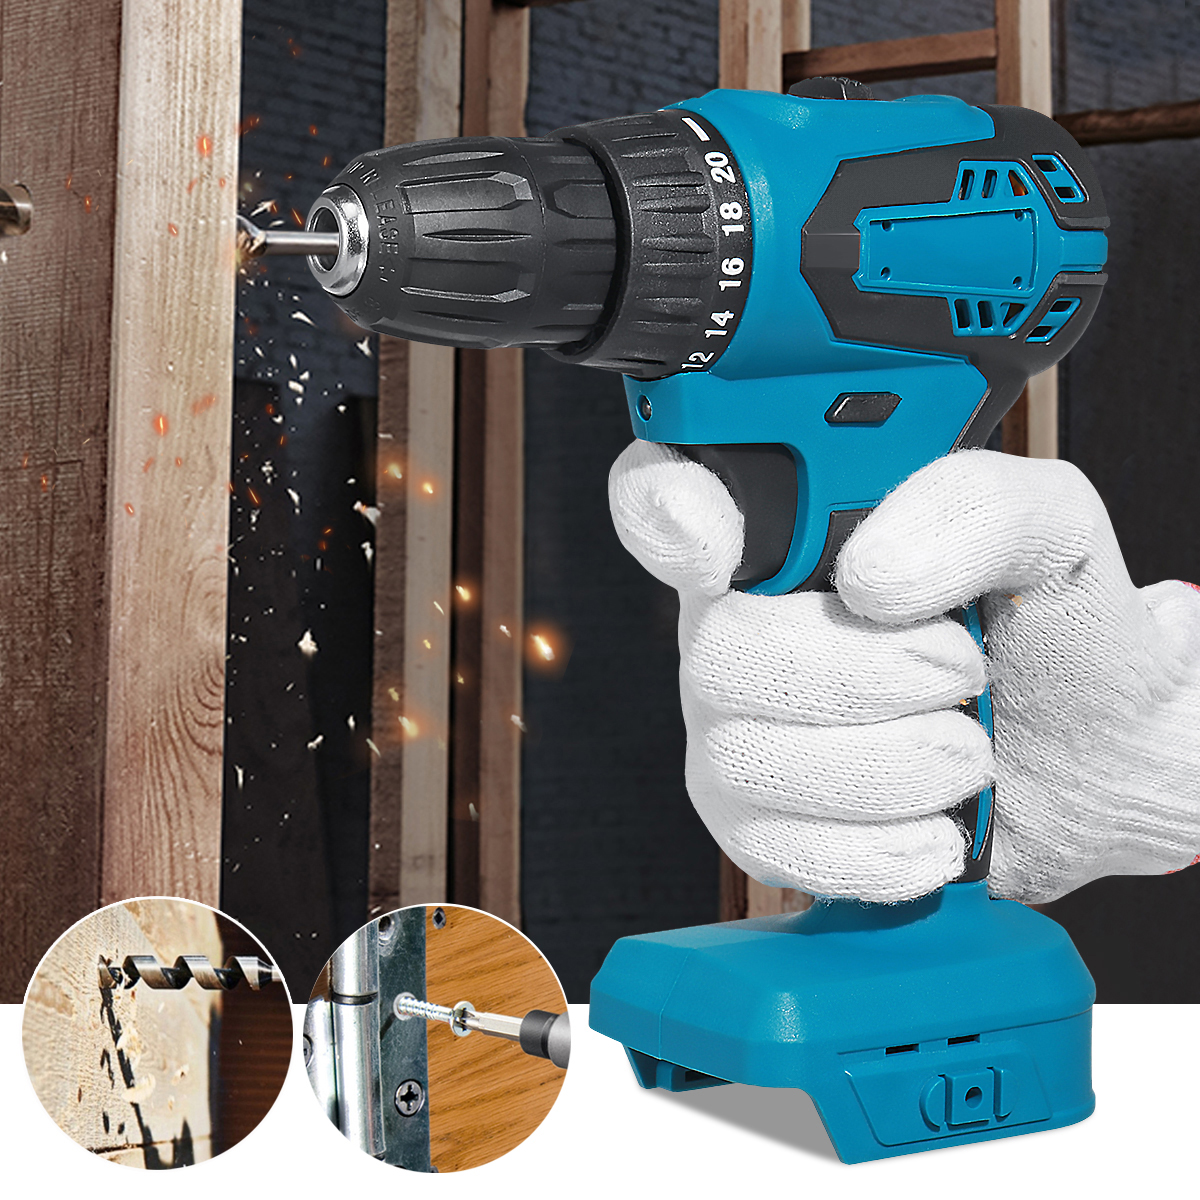 10mm-Rechargable-Electric-Drill-Screwdriver-1350RPM-2-Speed-Impact-Hand-Drill-Fit-Makita-Battery-1882944-4